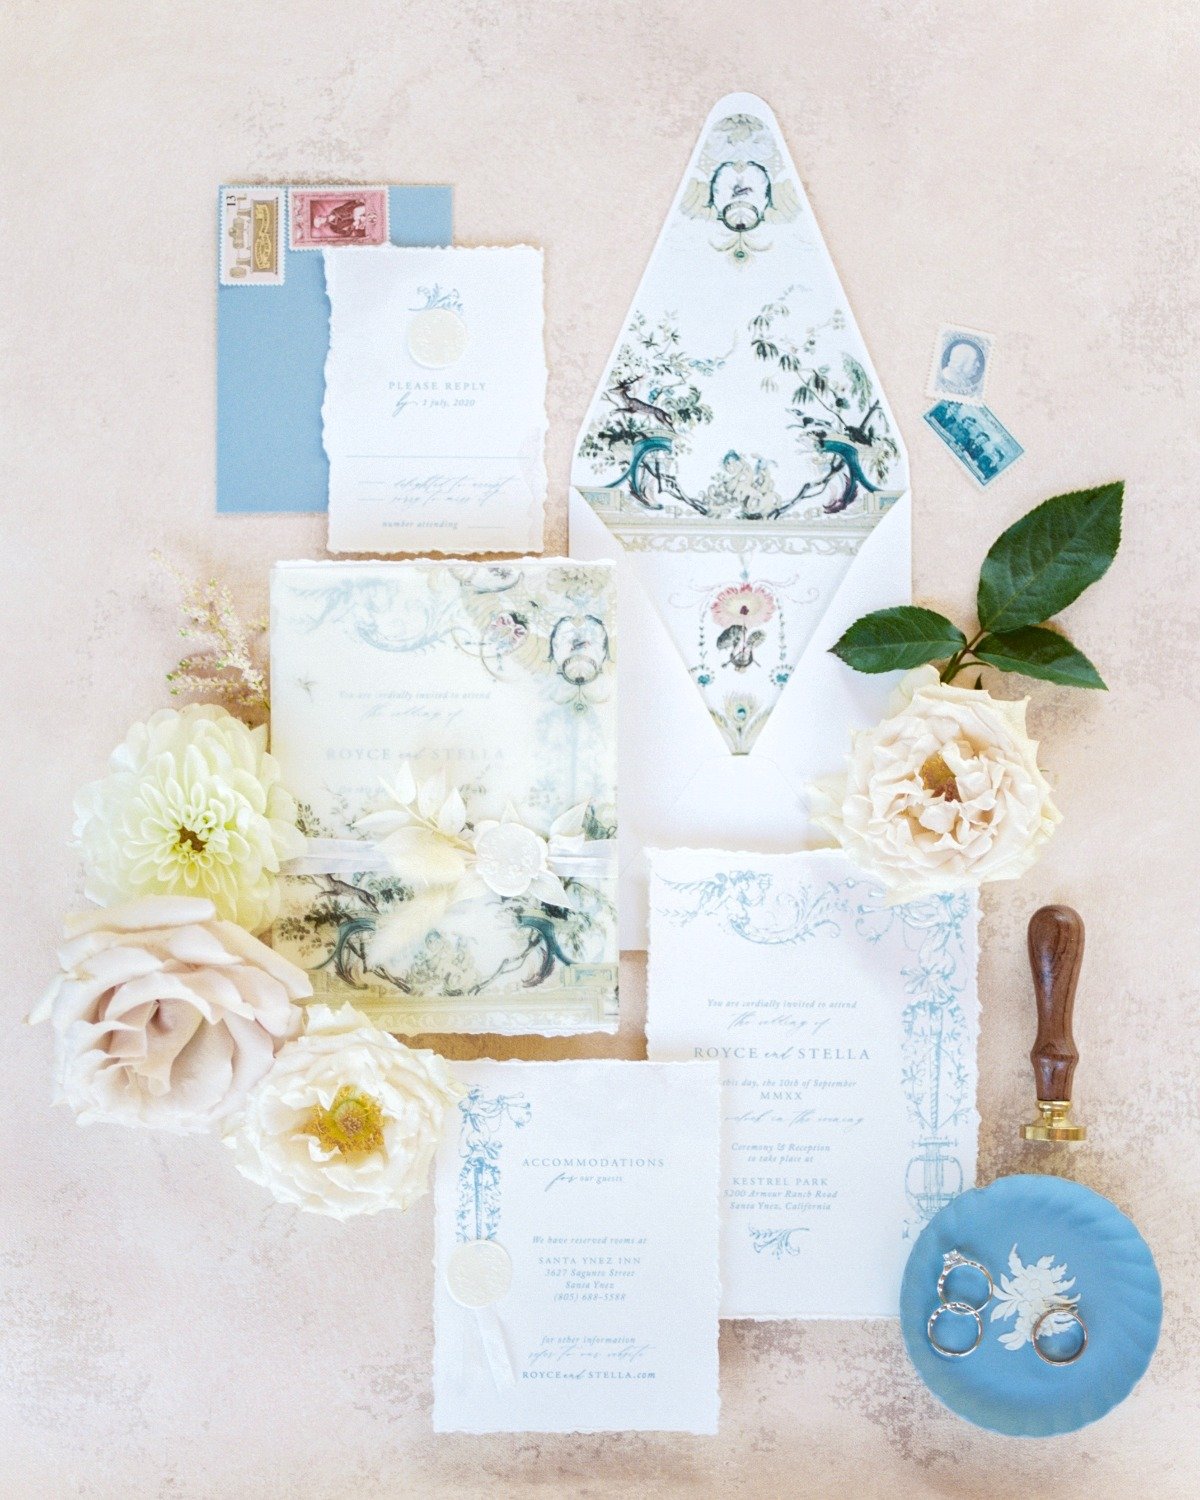 Custom Wedding Invitations Set the Tone for your Perfect Day